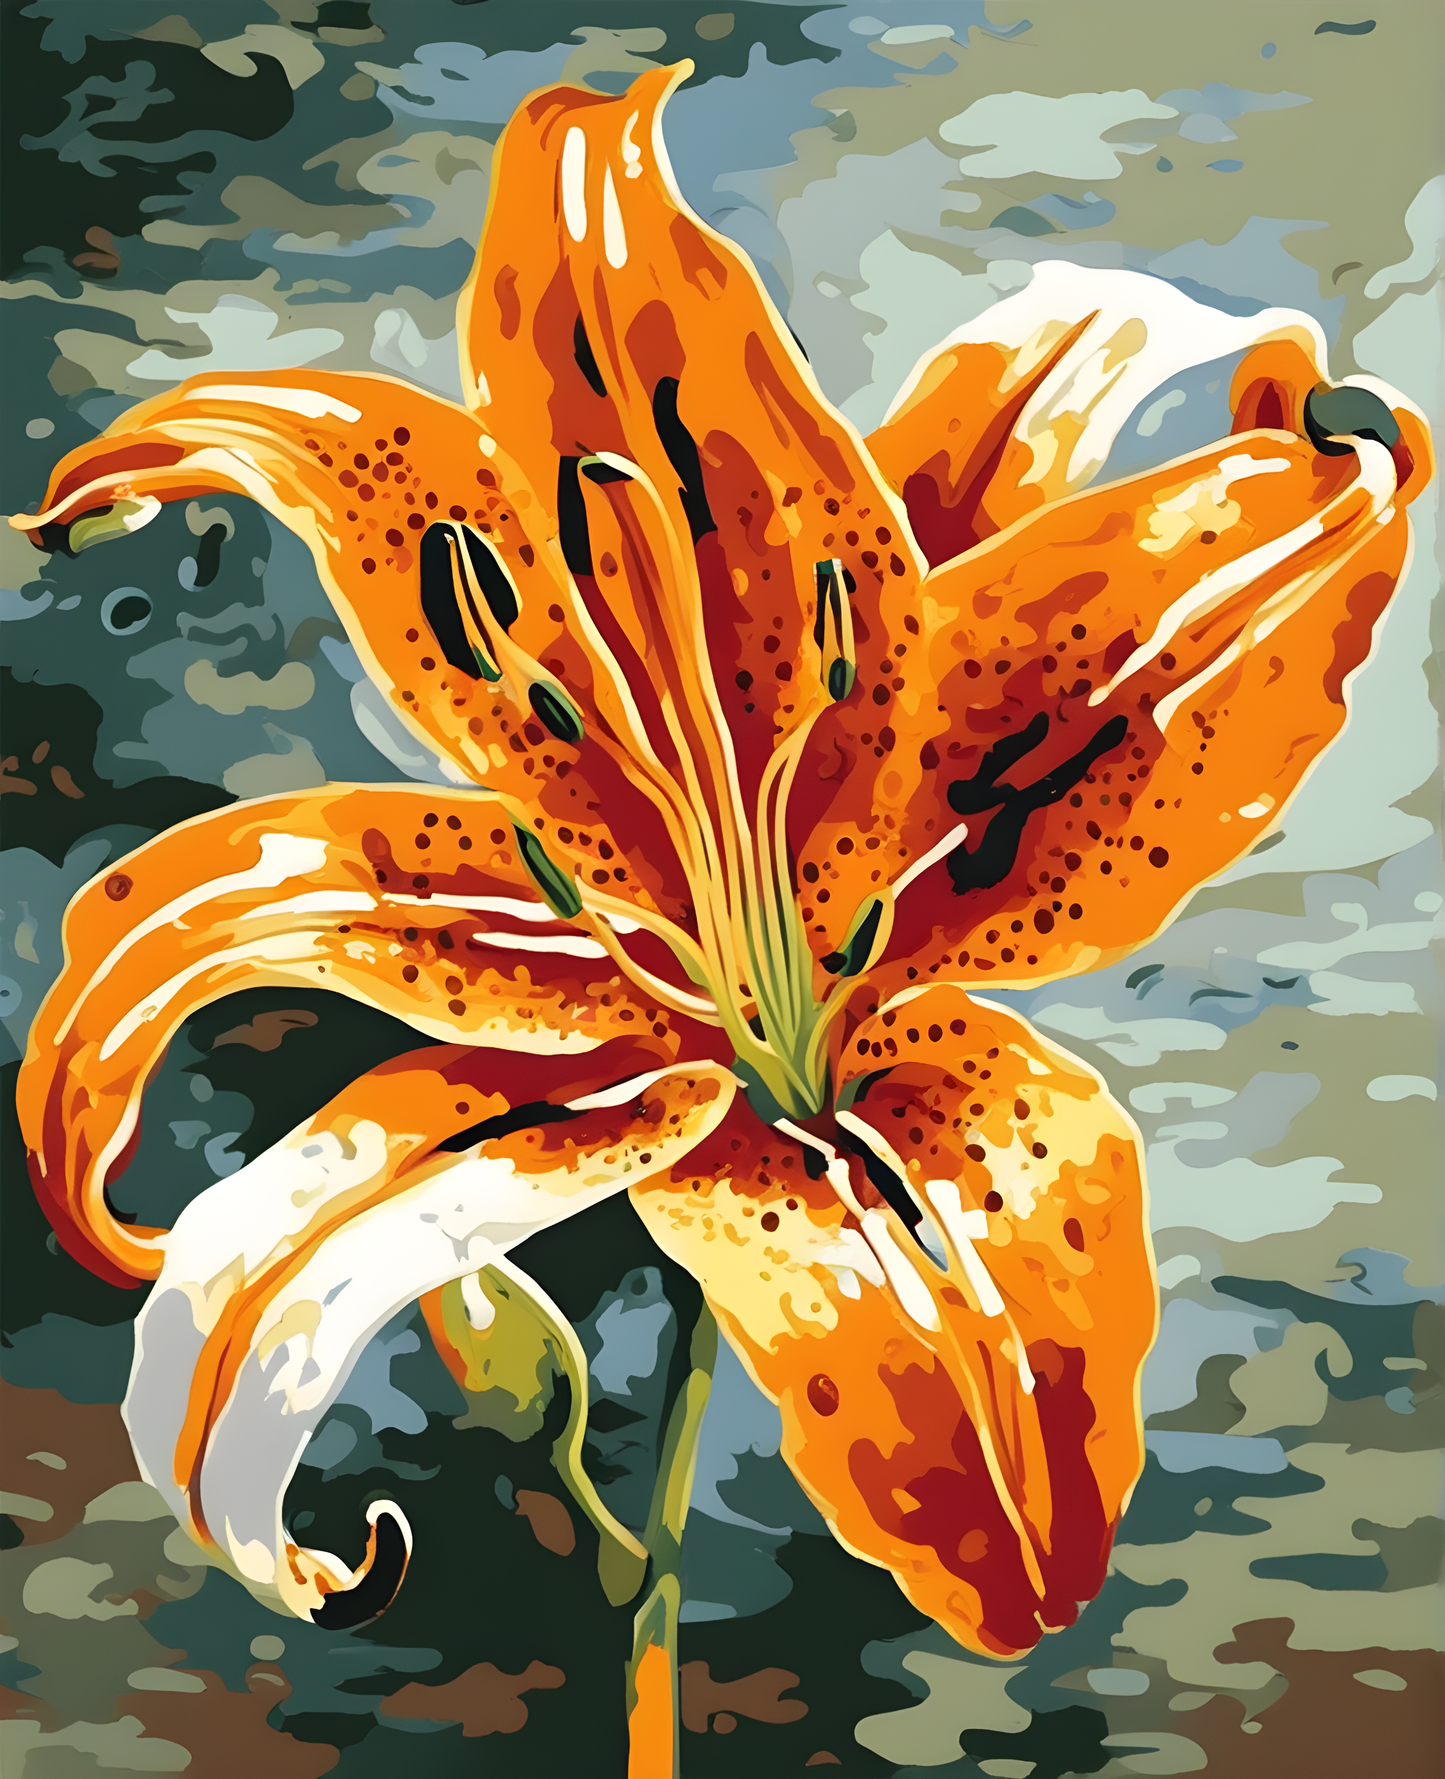 Flowers Collection OD (33) - Tiger Lily - Van-Go Paint-By-Number Kit